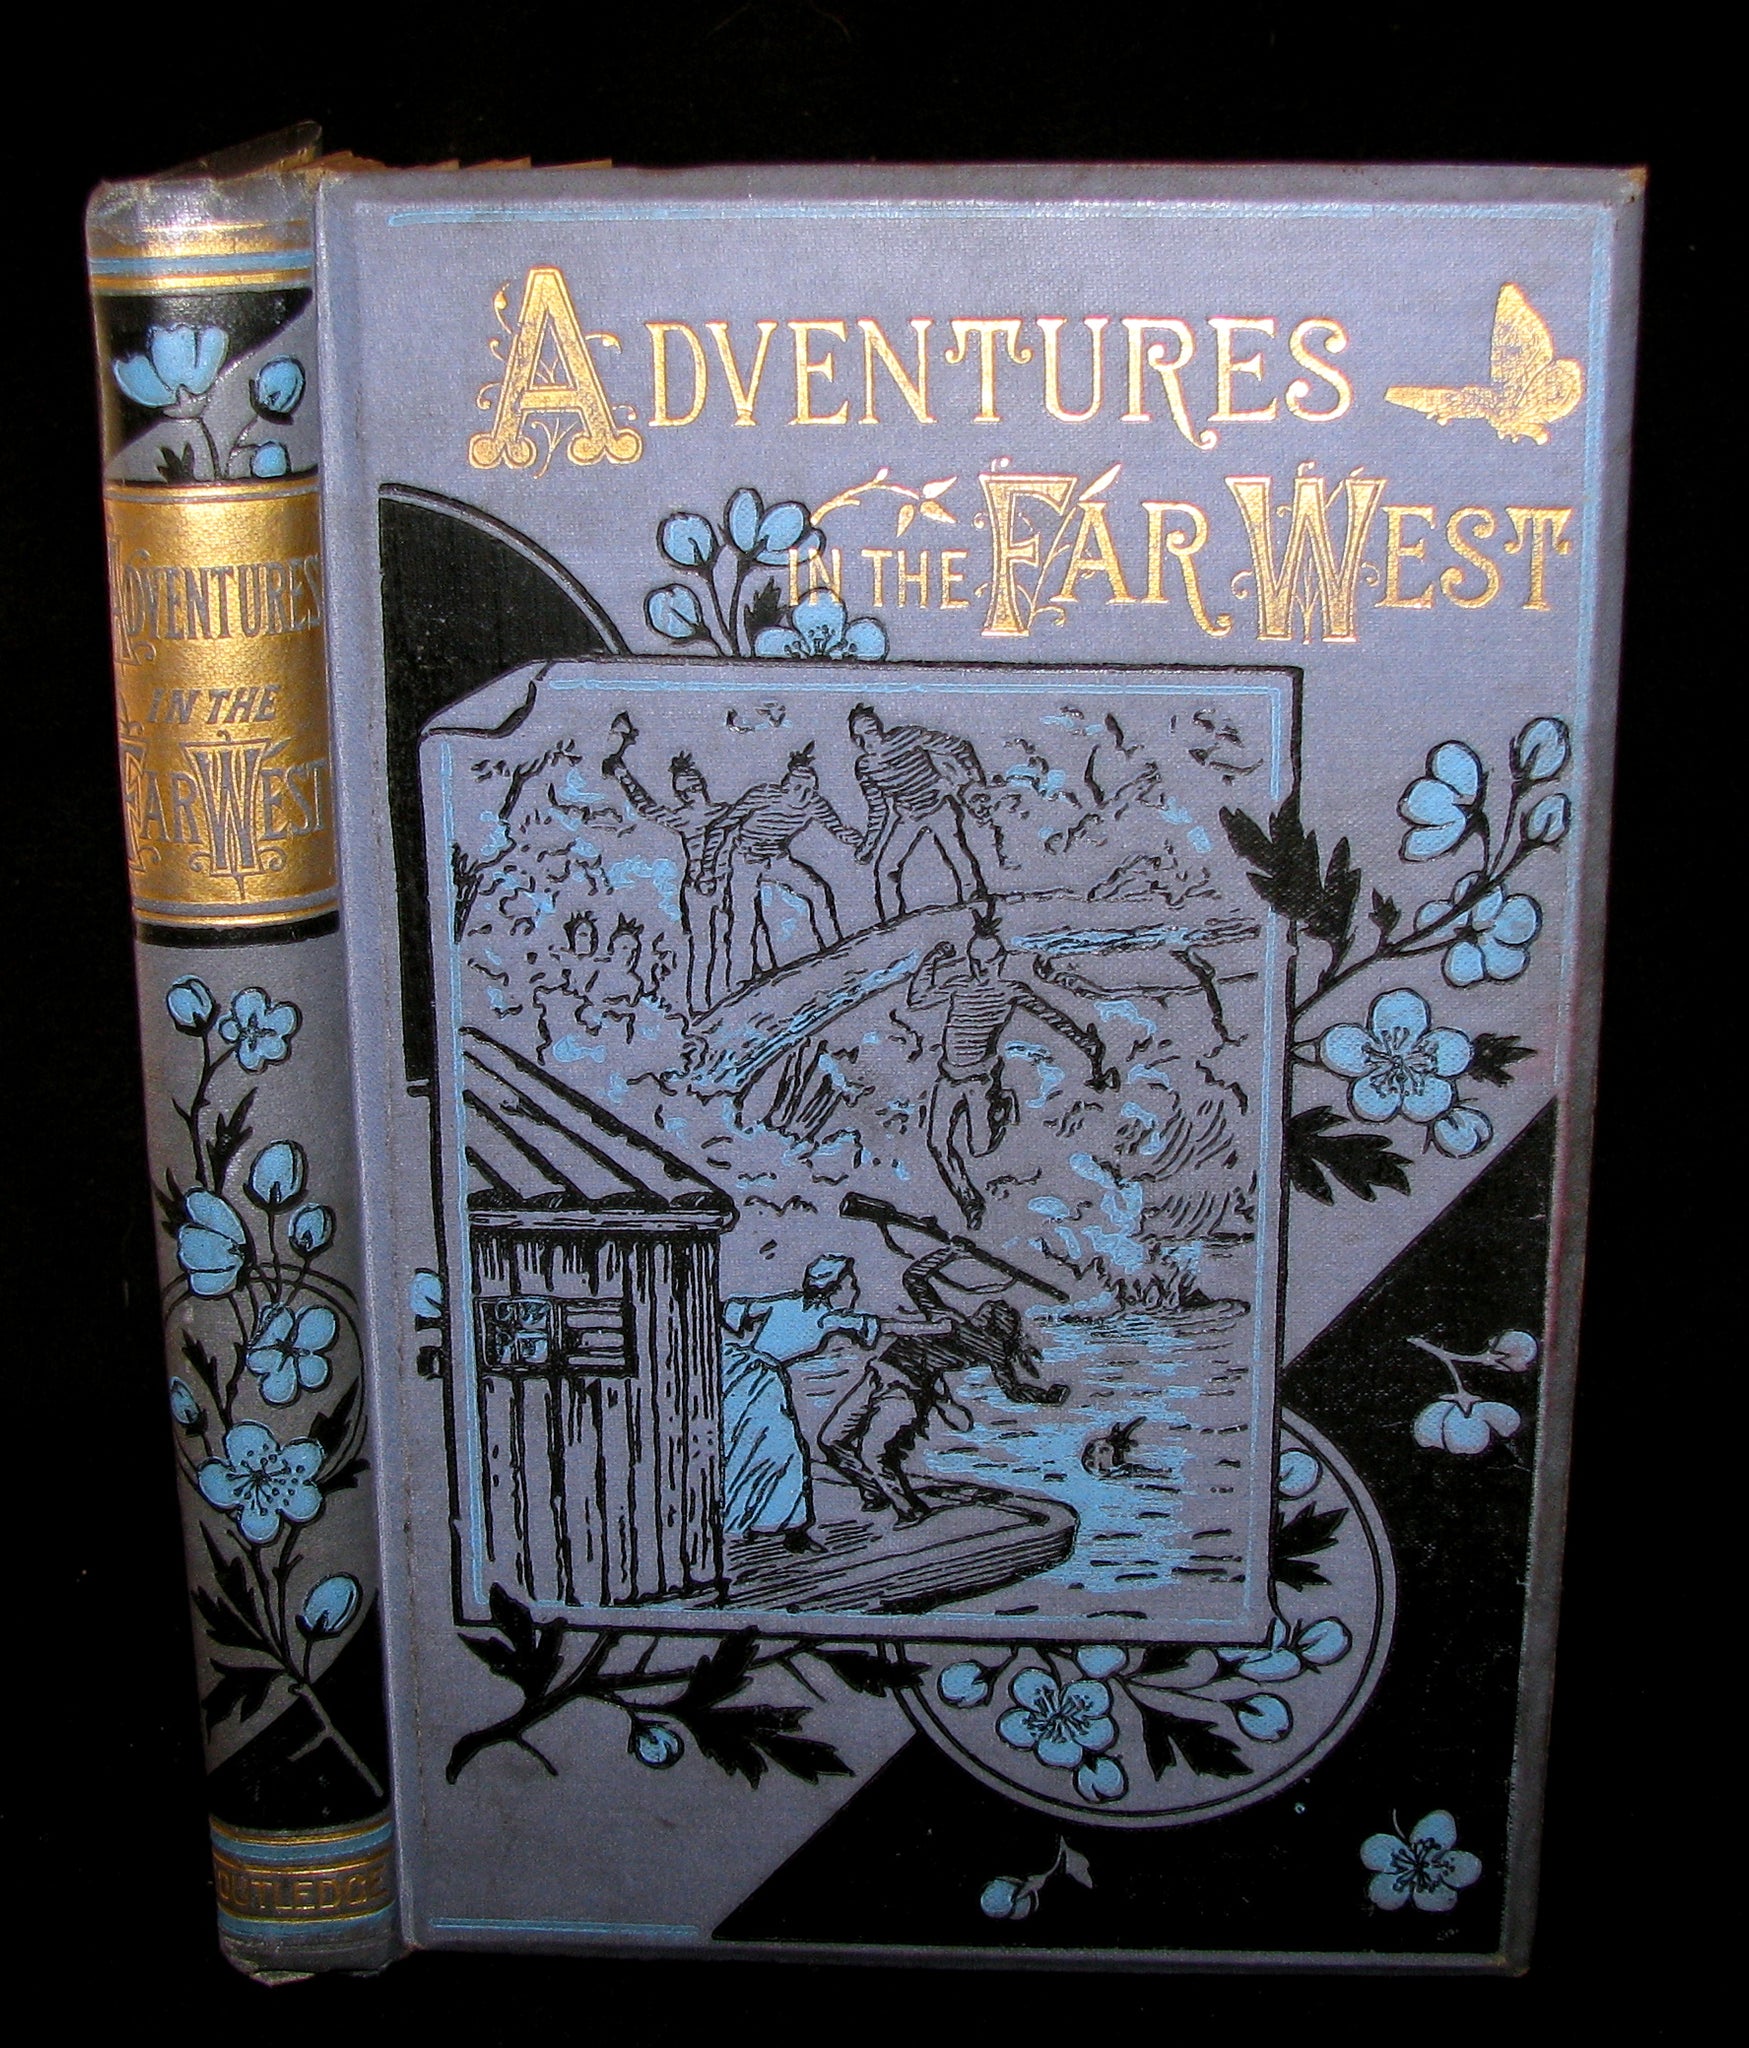 1881 Scarce Victorian Book - Adventures in the Far West by W. H. G. Kingston